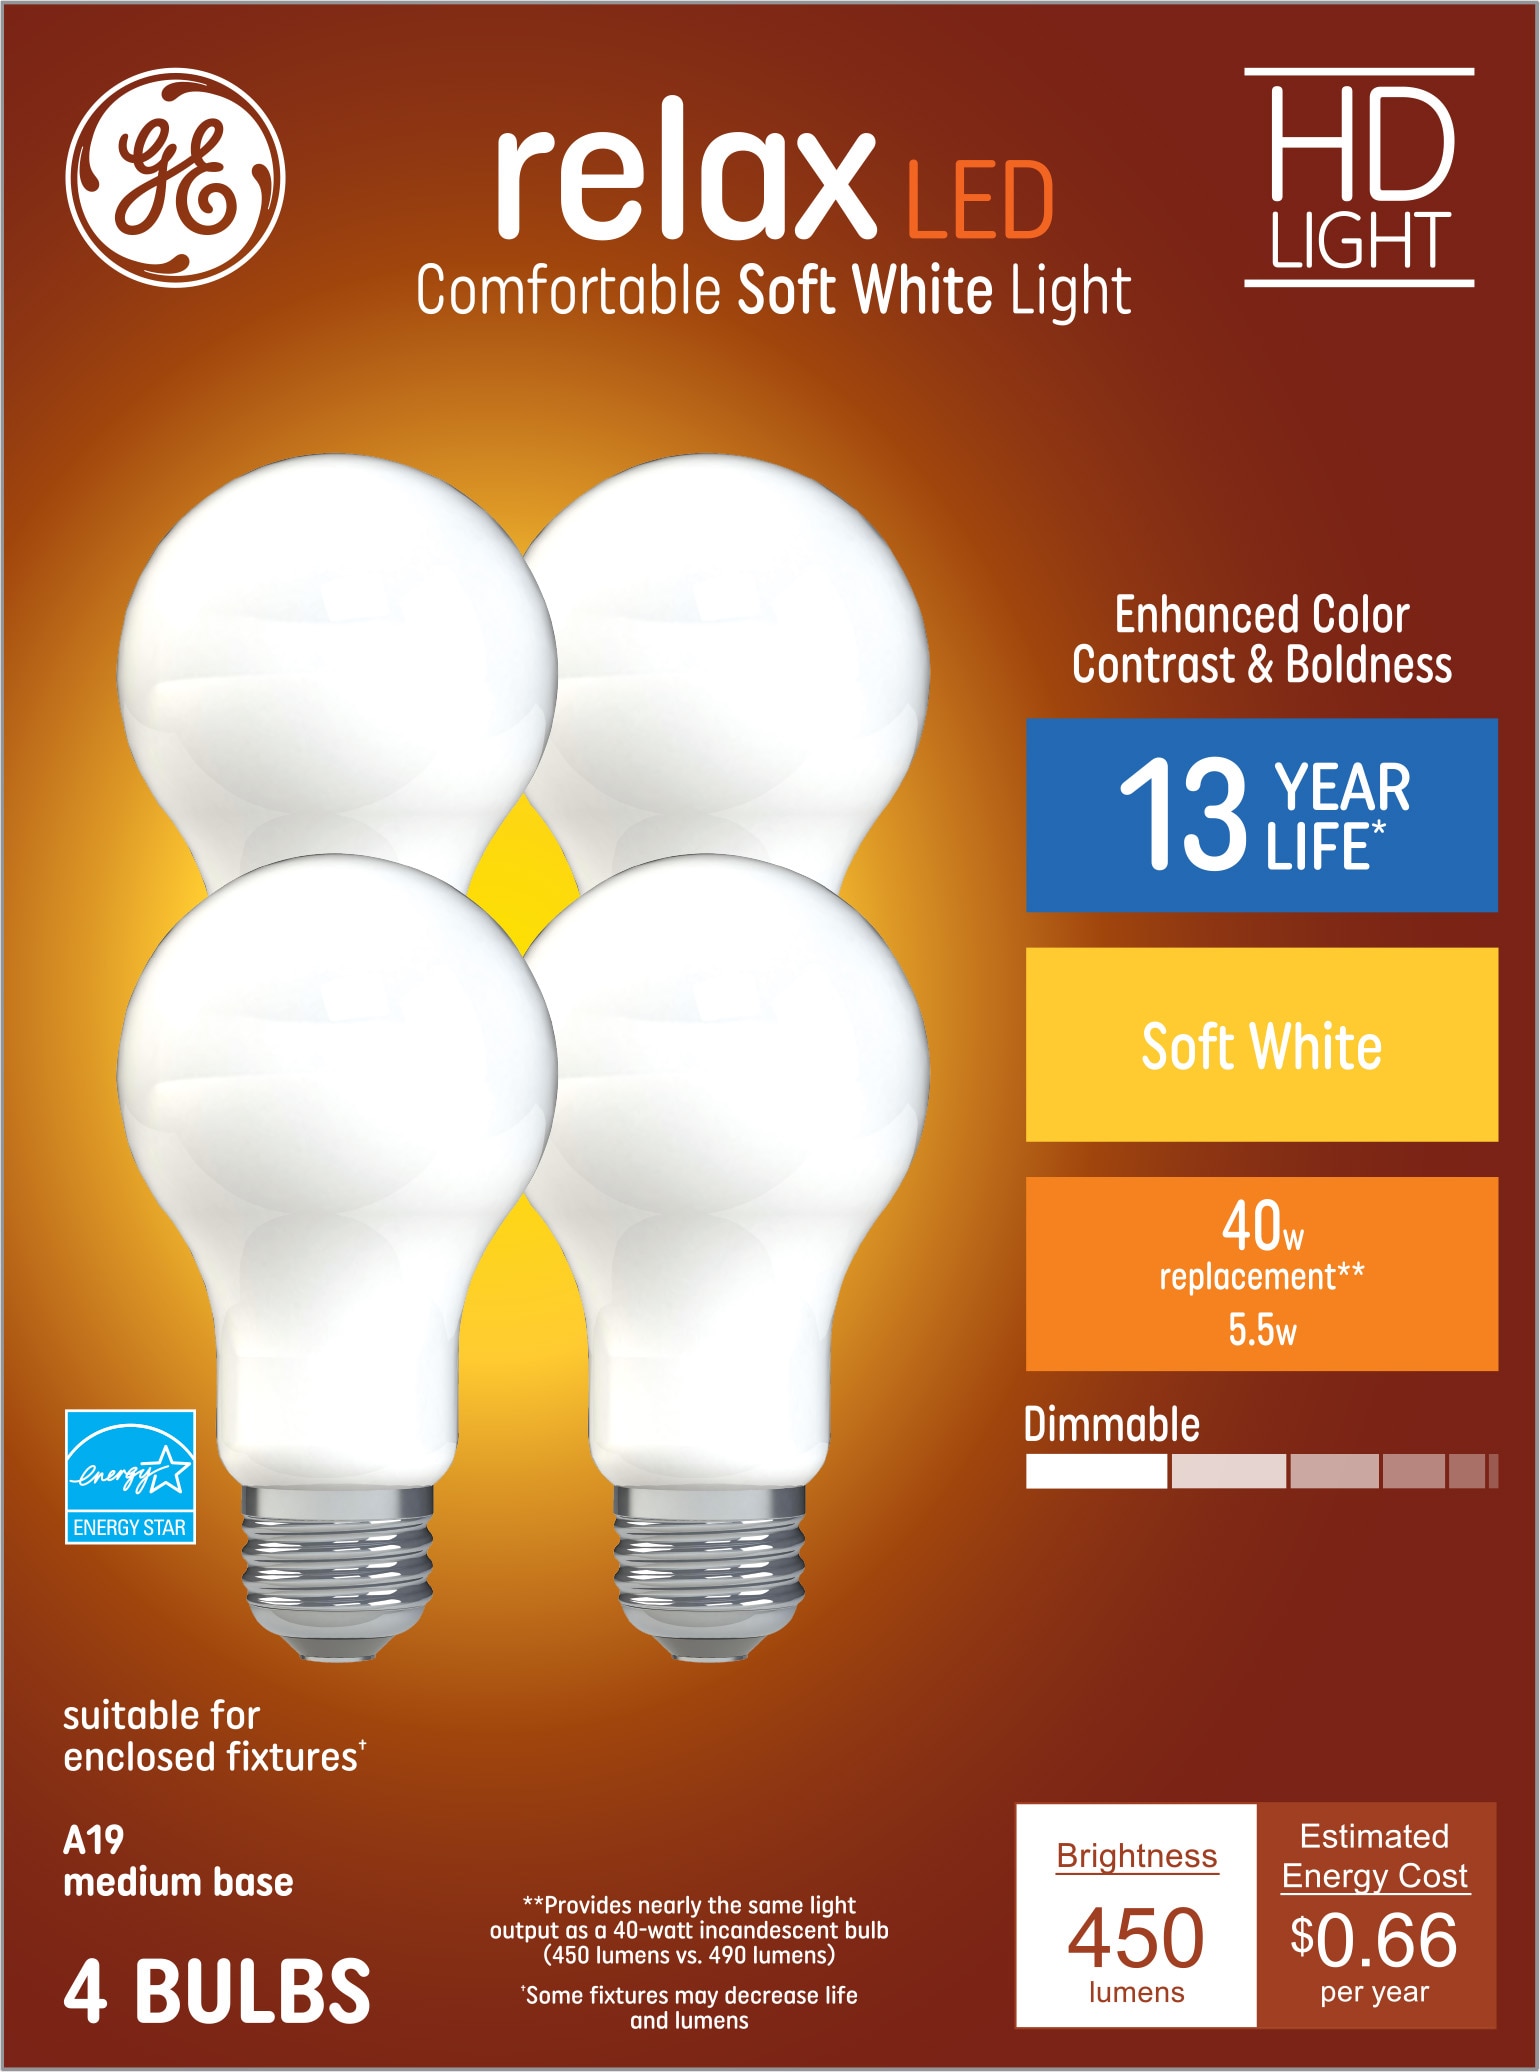 GY6.35 LED Light Bulb - 5W - 450 Lumens - Dimmable